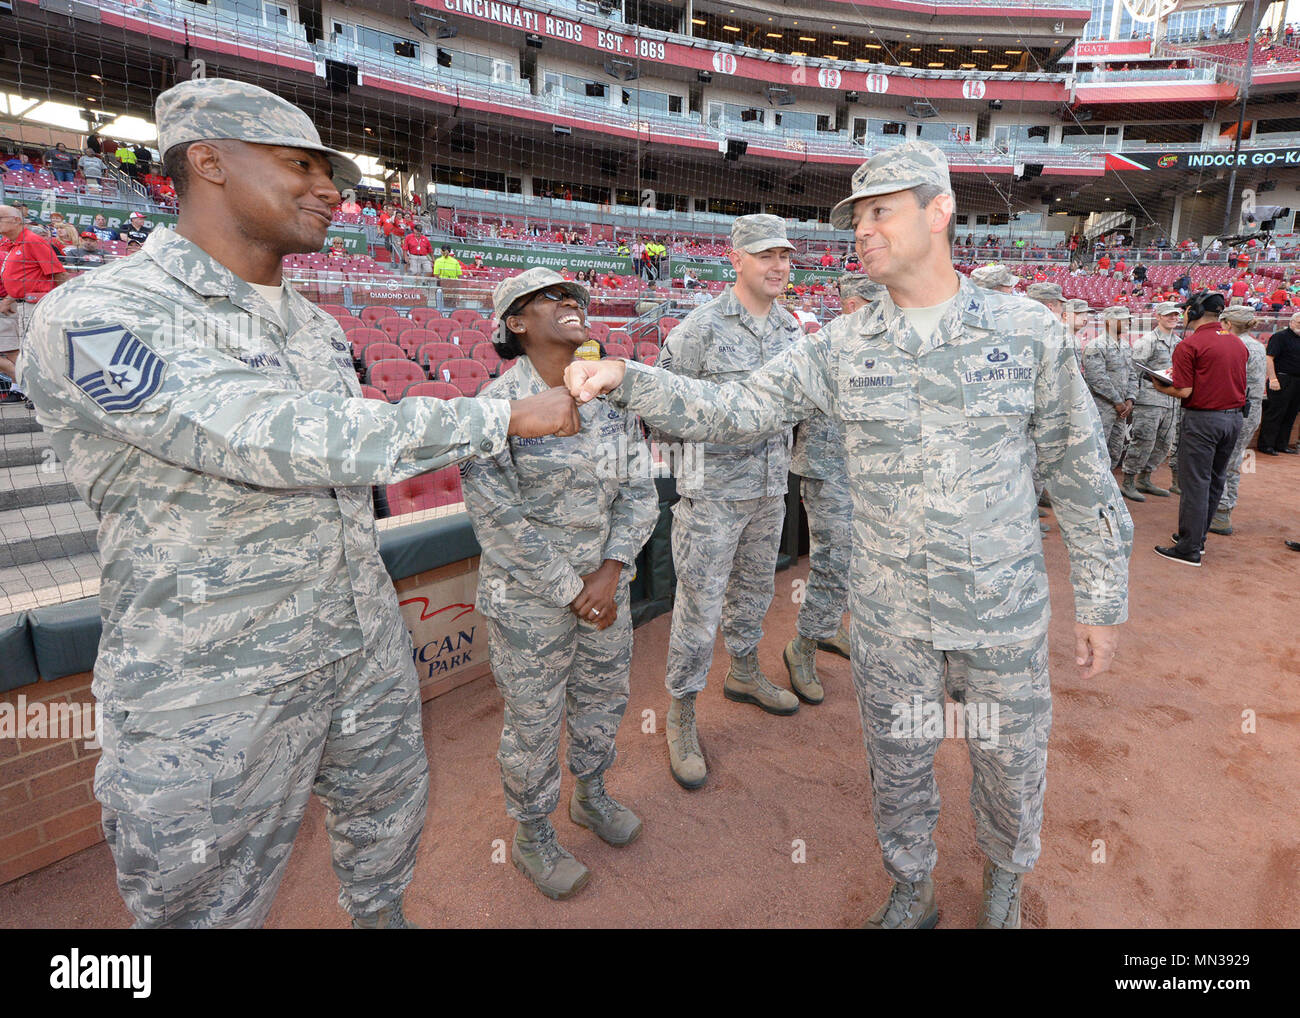 Colonel Bradley McDonald, 88th Air Base wing commander, with a fist bump congratulates Master Sergeant Nicholas Northam, Air Force Life Cycle Management Command base contracting A-Flight Non Commission Officer in Charge, for his superior job performance during pregame ceremonies at the Great American Ballpark, Cincinnati OH, August 25, 2017. The Cincinnati Reds baseball team sponsored the event to honor military members for service to the country. (U.S. Air Force Photo by Al Bright/Released) Stock Photo